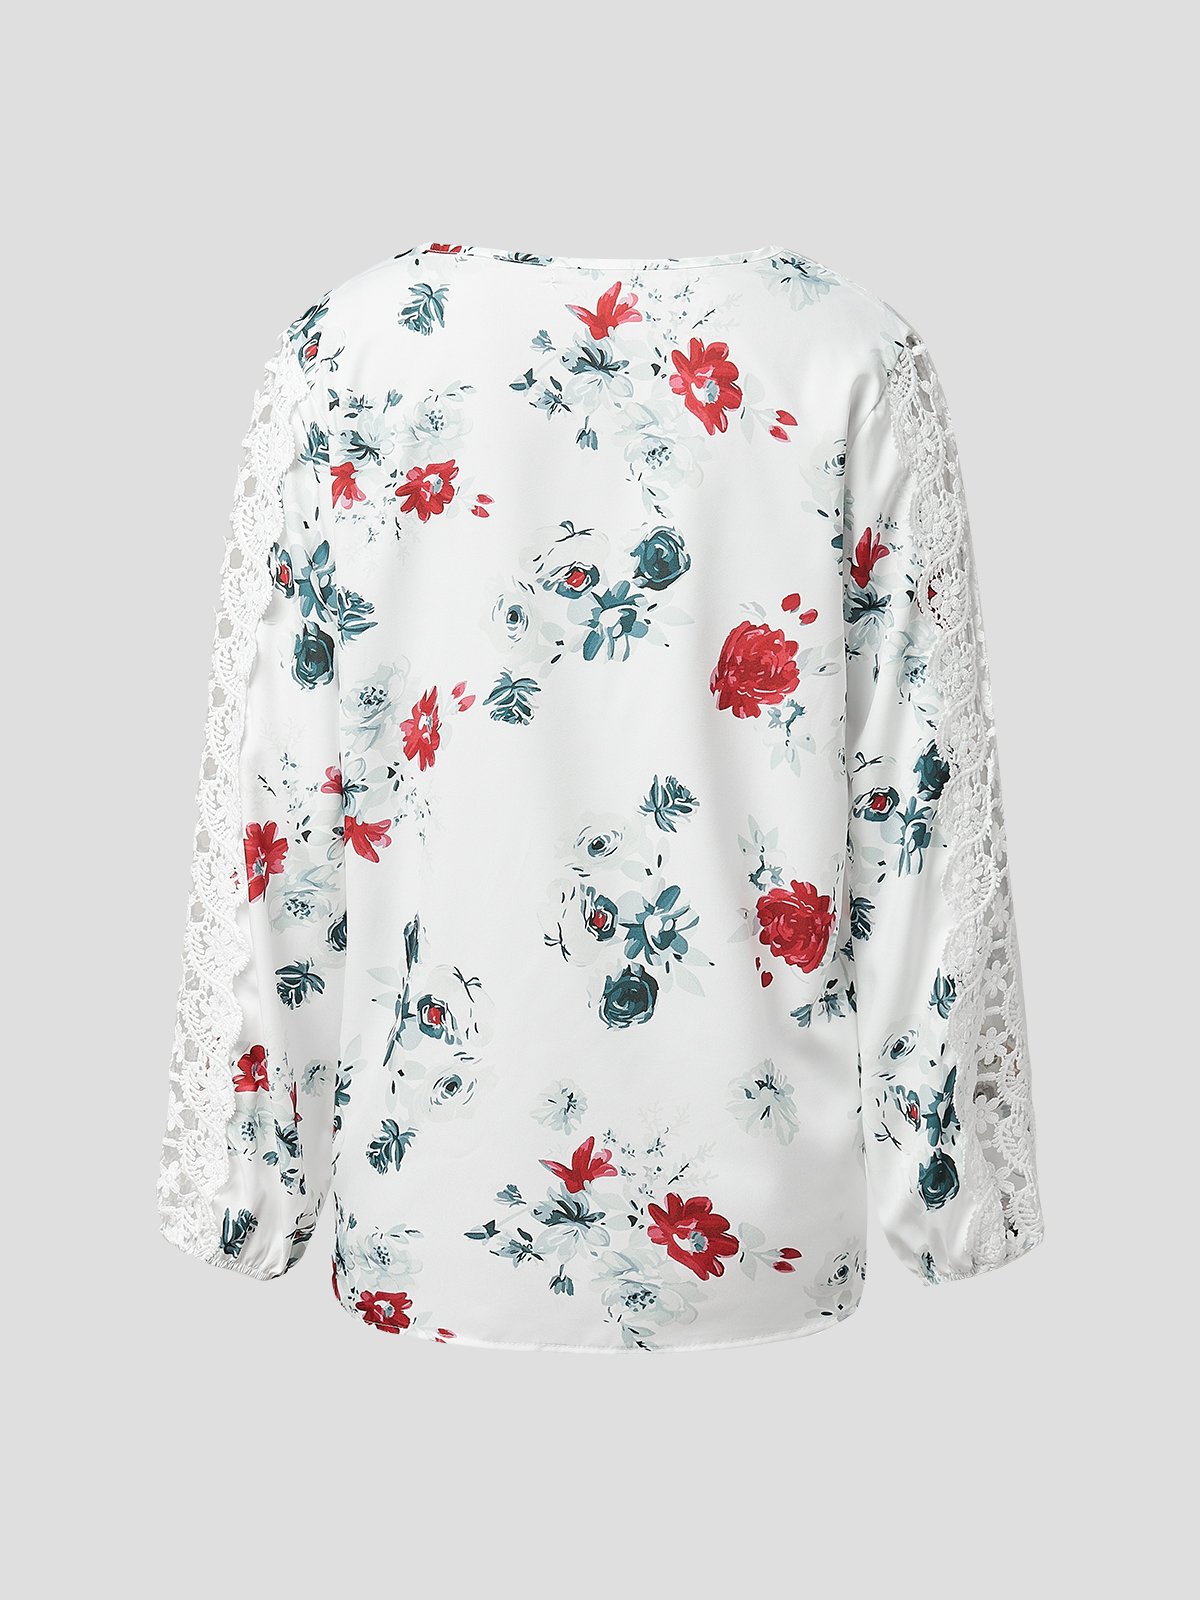 Women Floral Print Lace Patchwork Long Sleeve V Neck Holiday Blouse